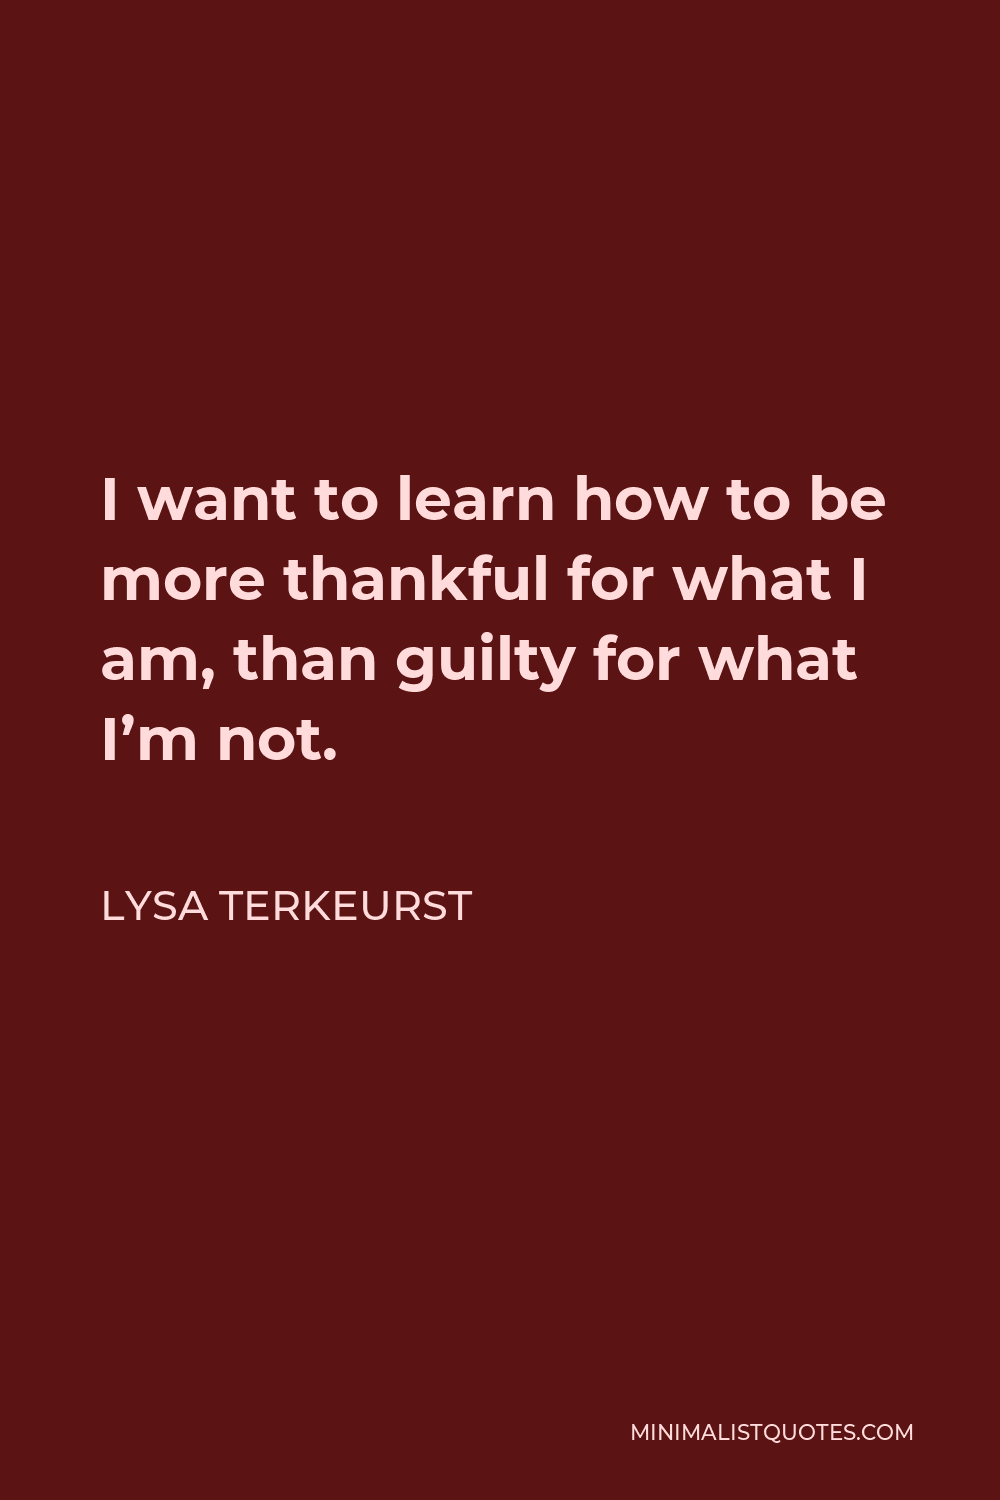 Lysa TerKeurst Quote - I want to learn how to be more thankful for what I am, than guilty for what I’m not.